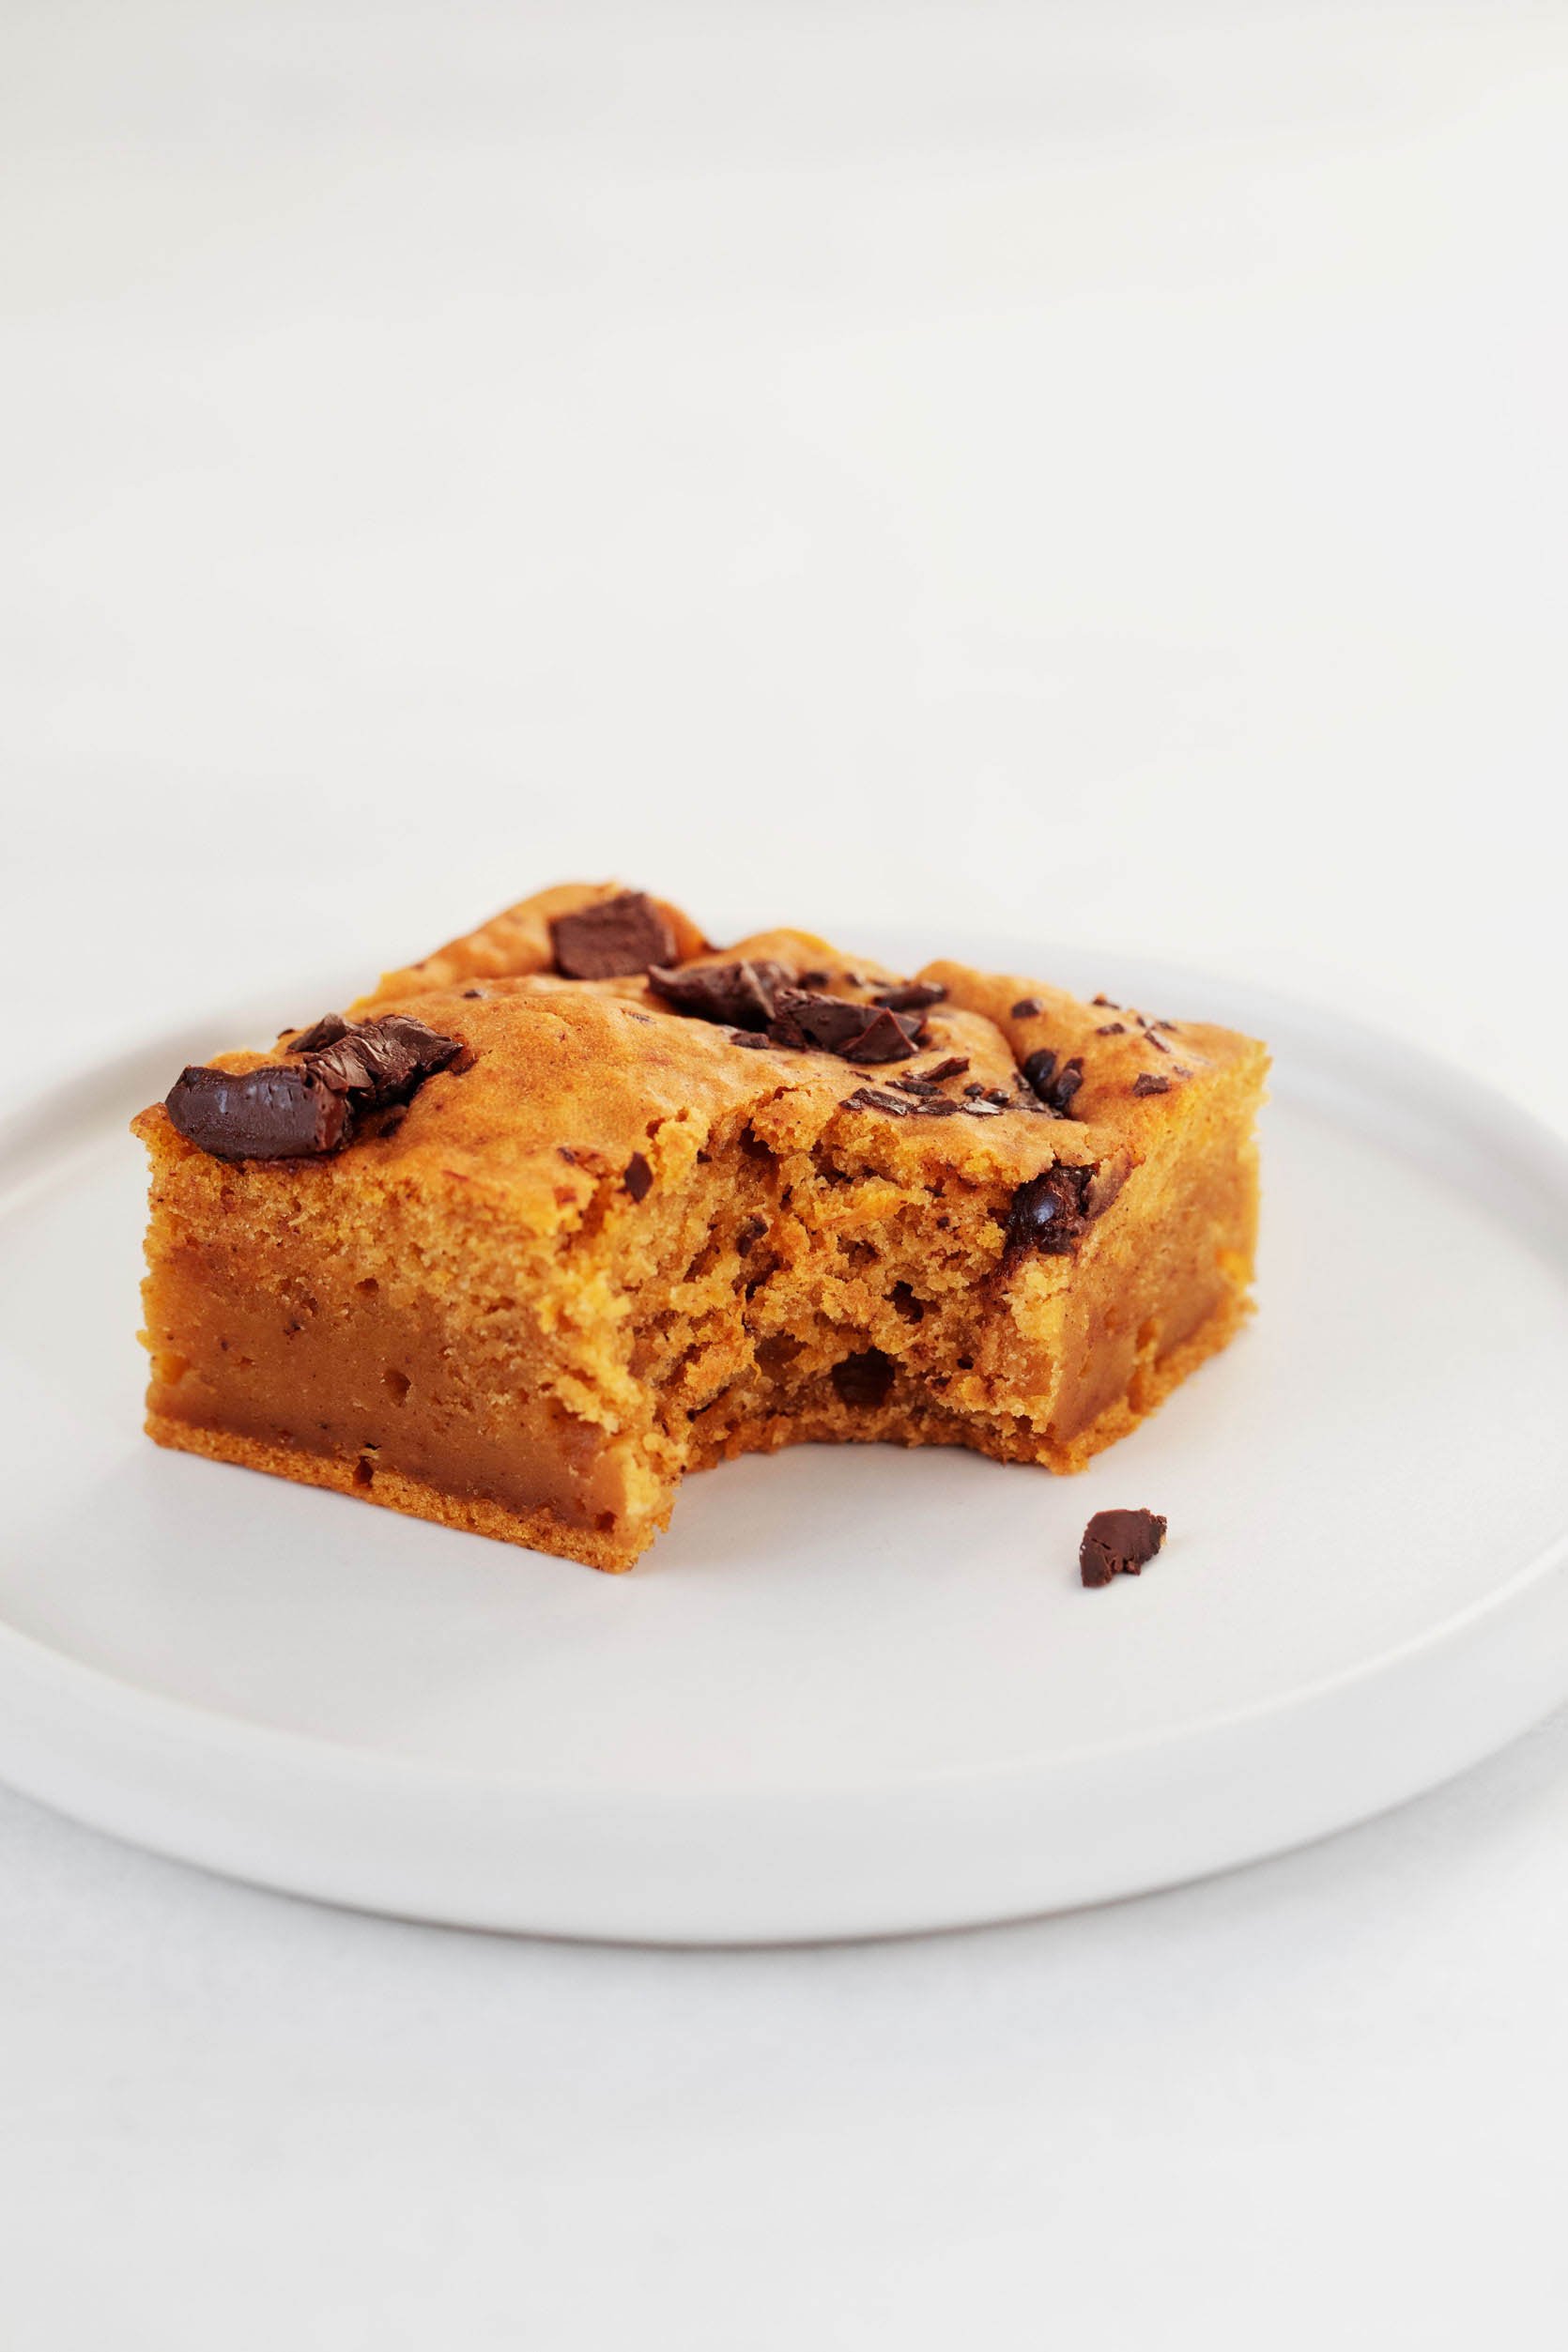 A cakey vegan pumpkin chocolate chip blondie is resting on a small, rimmed, white dessert plate.